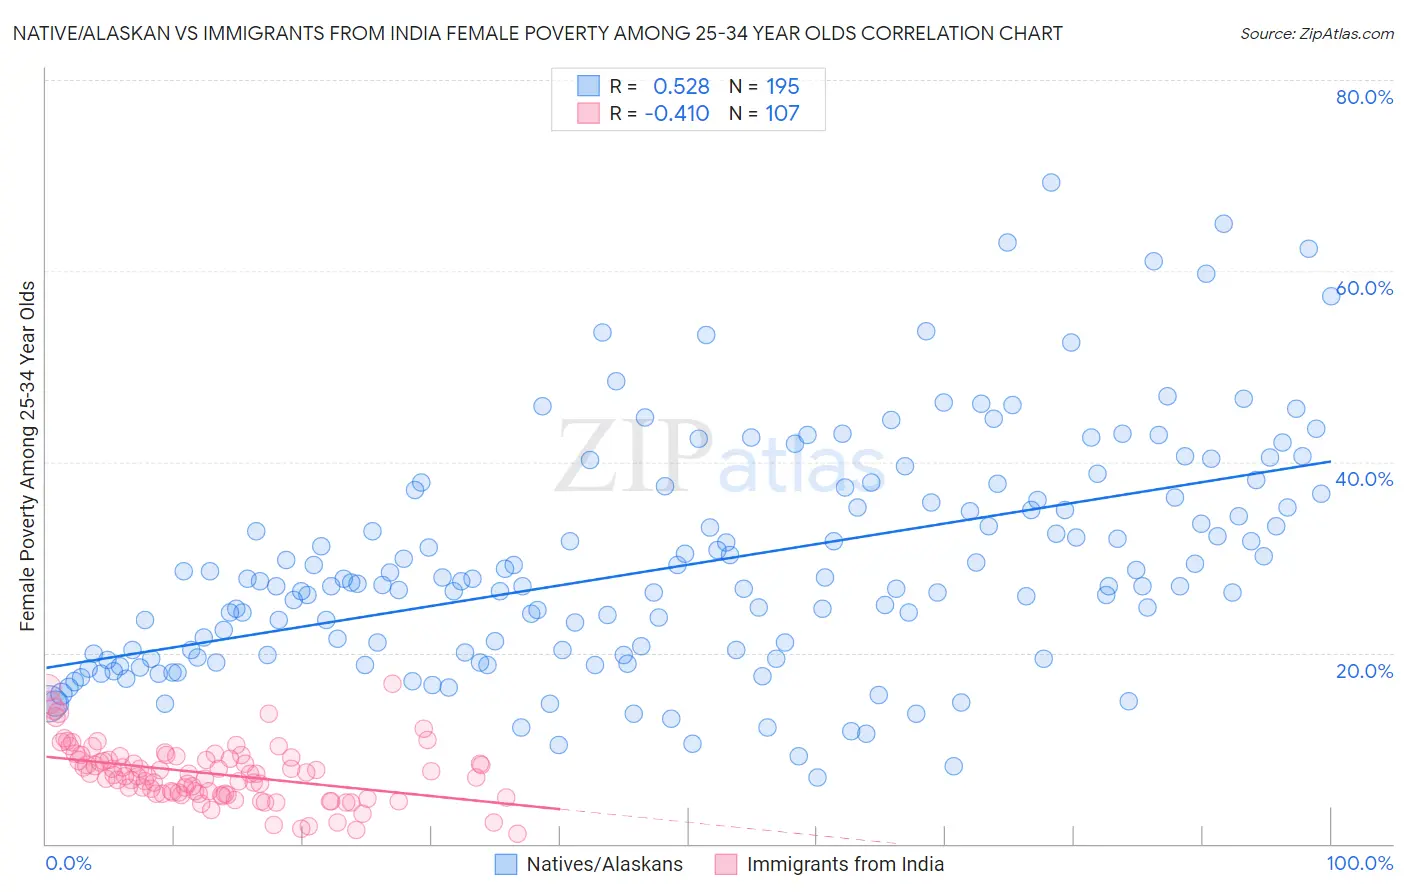 Native/Alaskan vs Immigrants from India Female Poverty Among 25-34 Year Olds